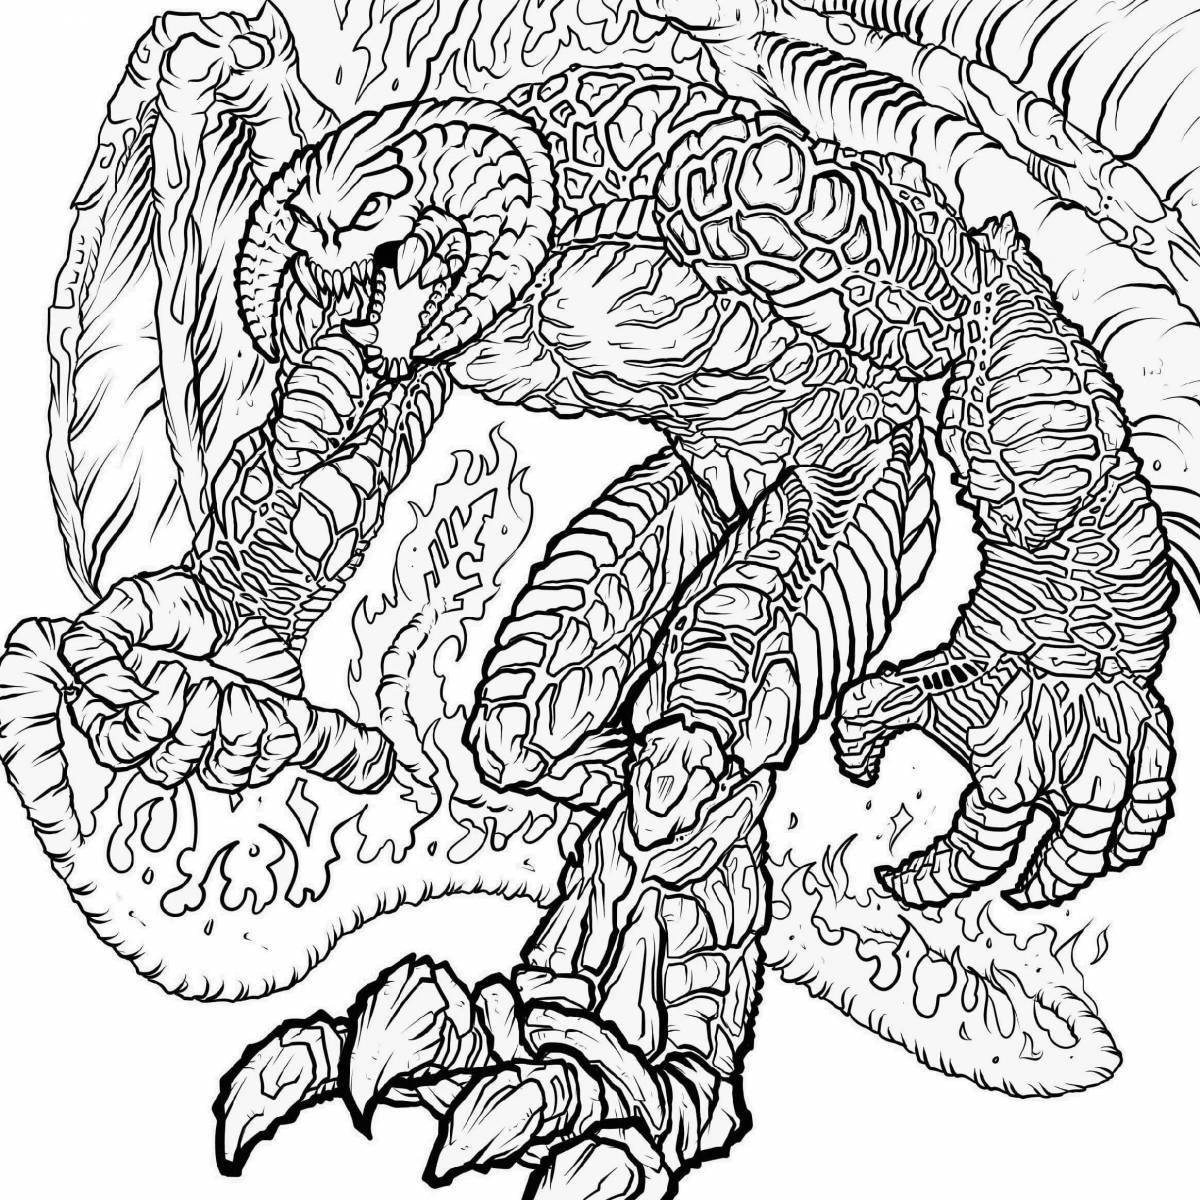 Playful rainbow monsters coloring page